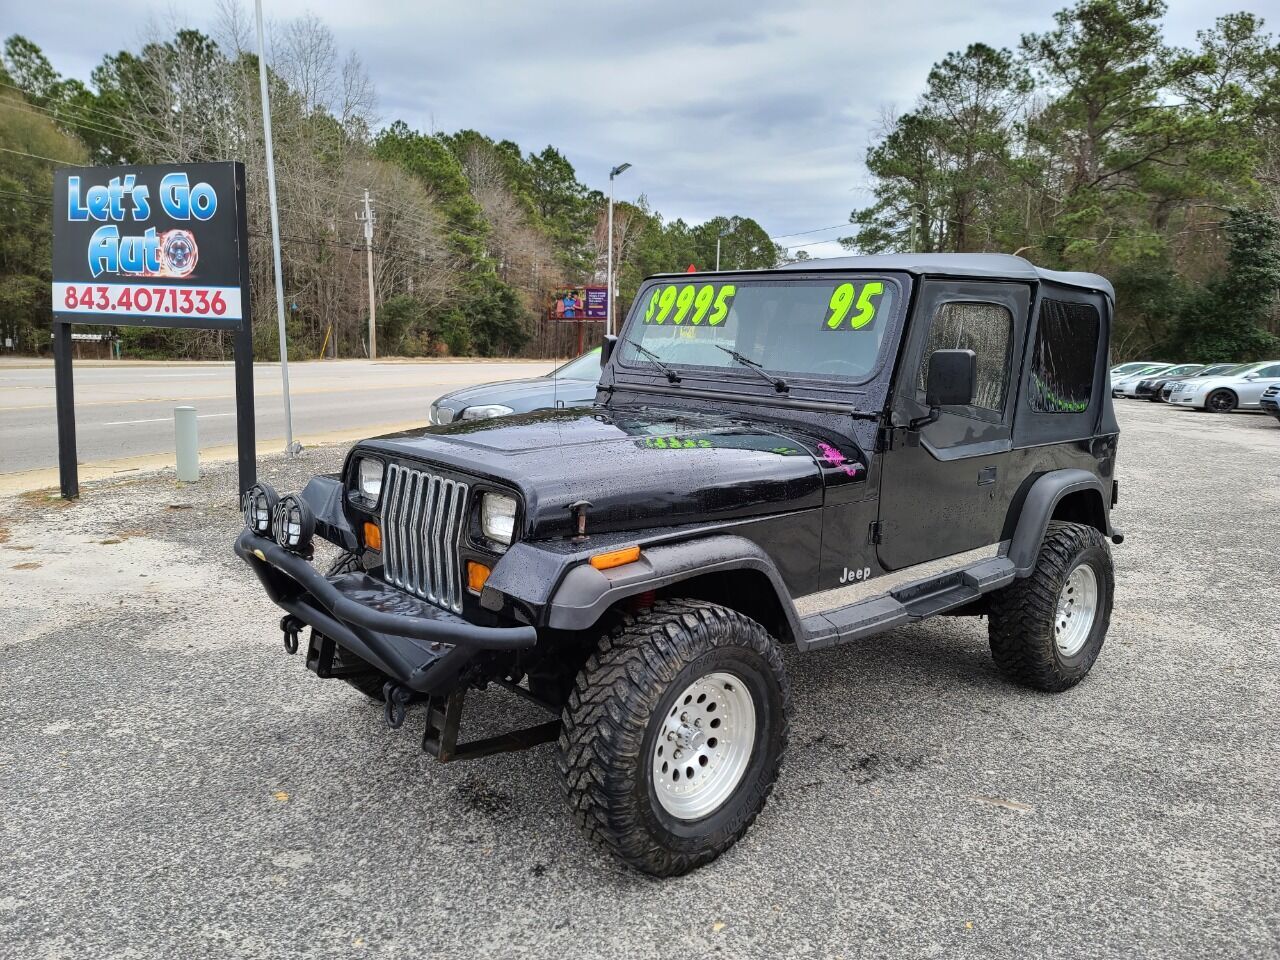 Lifted Wrangler For Sale Online Price, Save 68% 